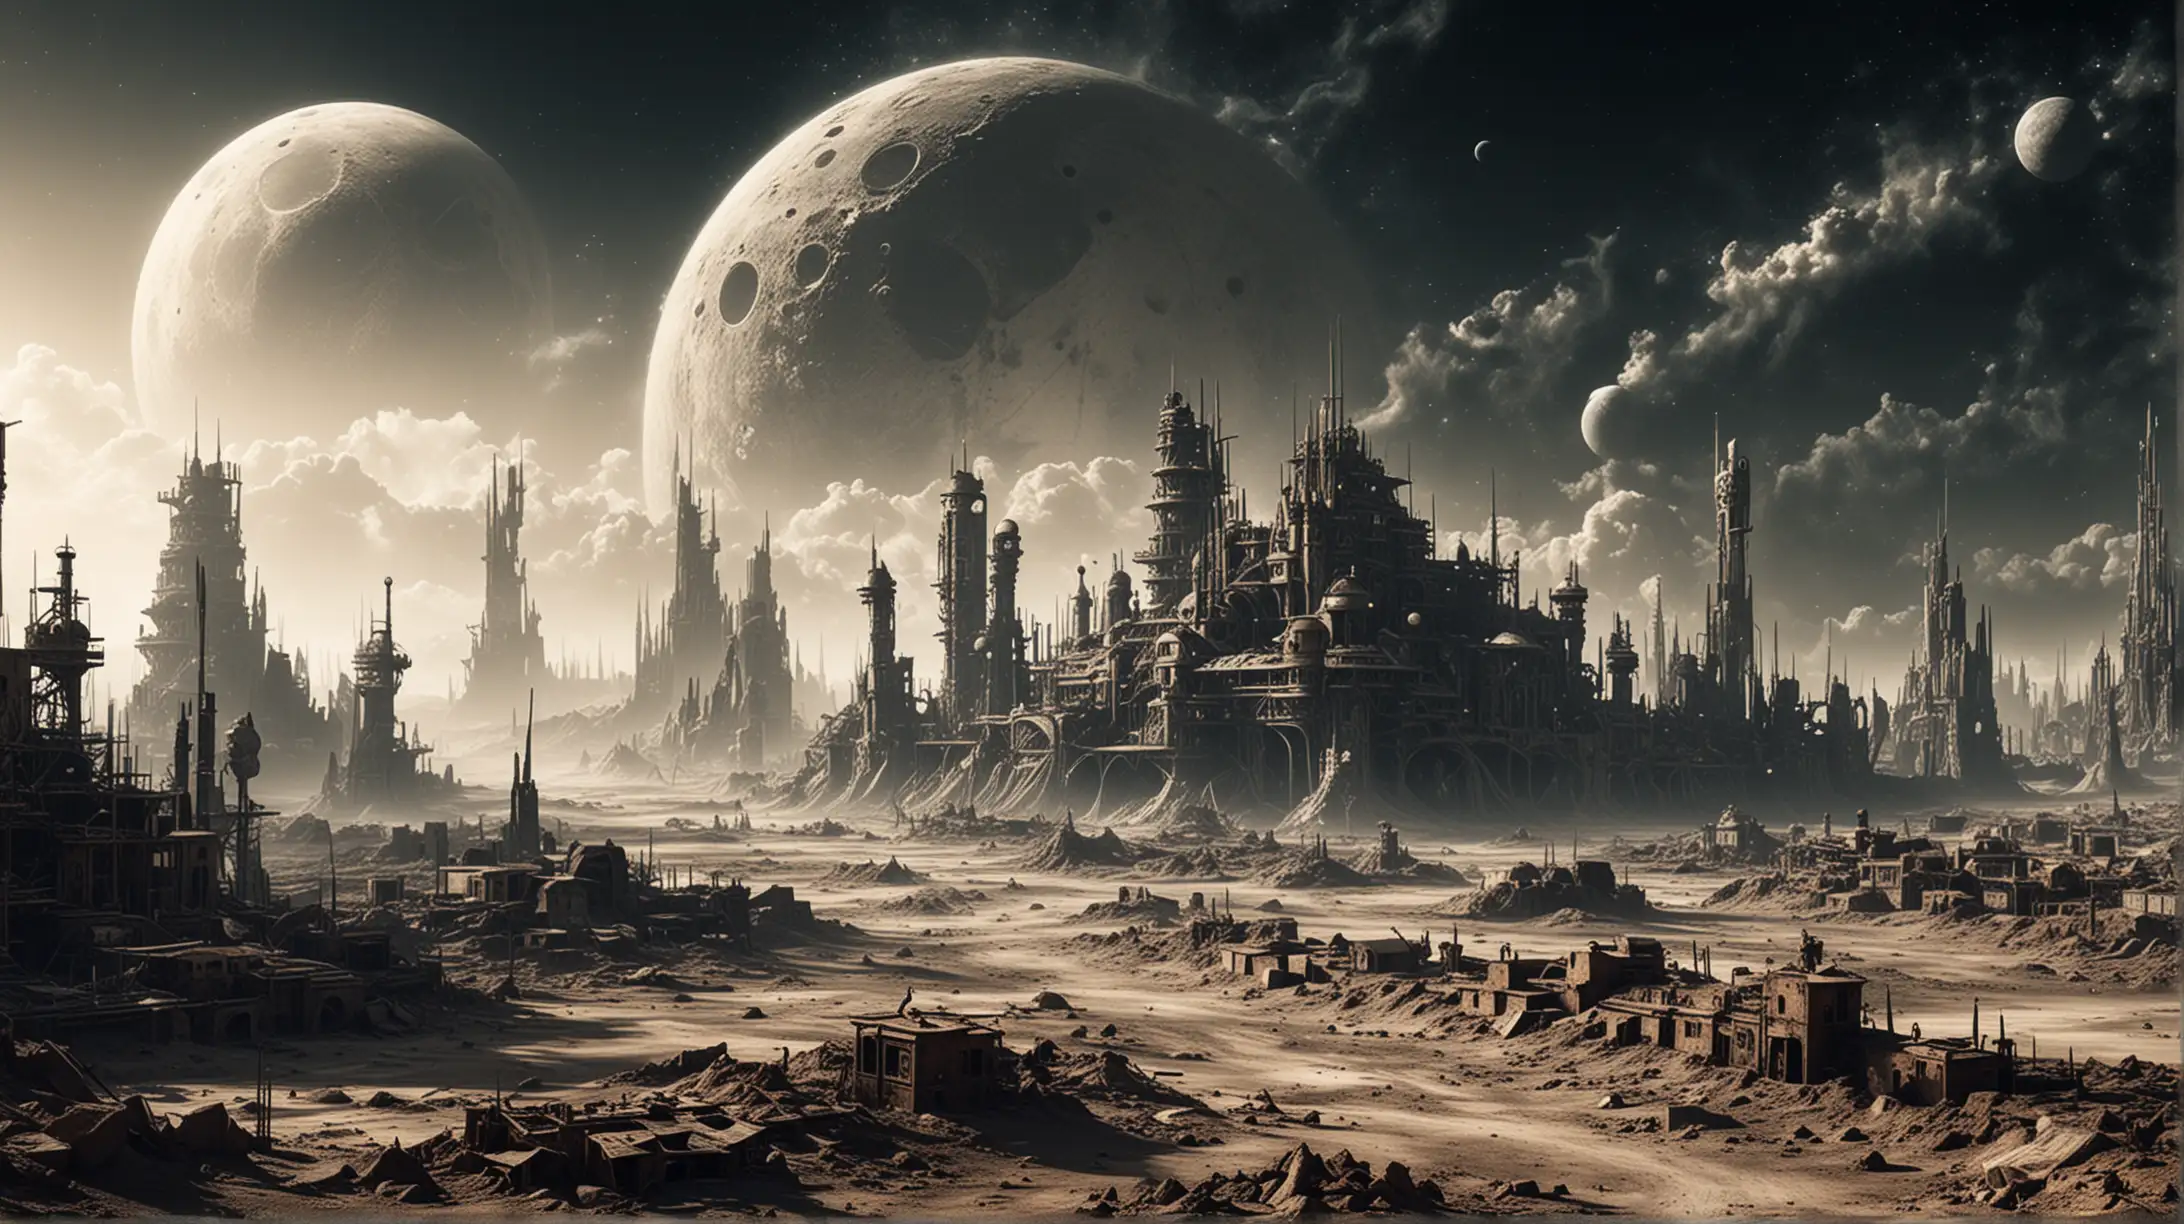 abandoden steampunk city on the moon, all buildings are covered by dust, the earth is visible in the sky